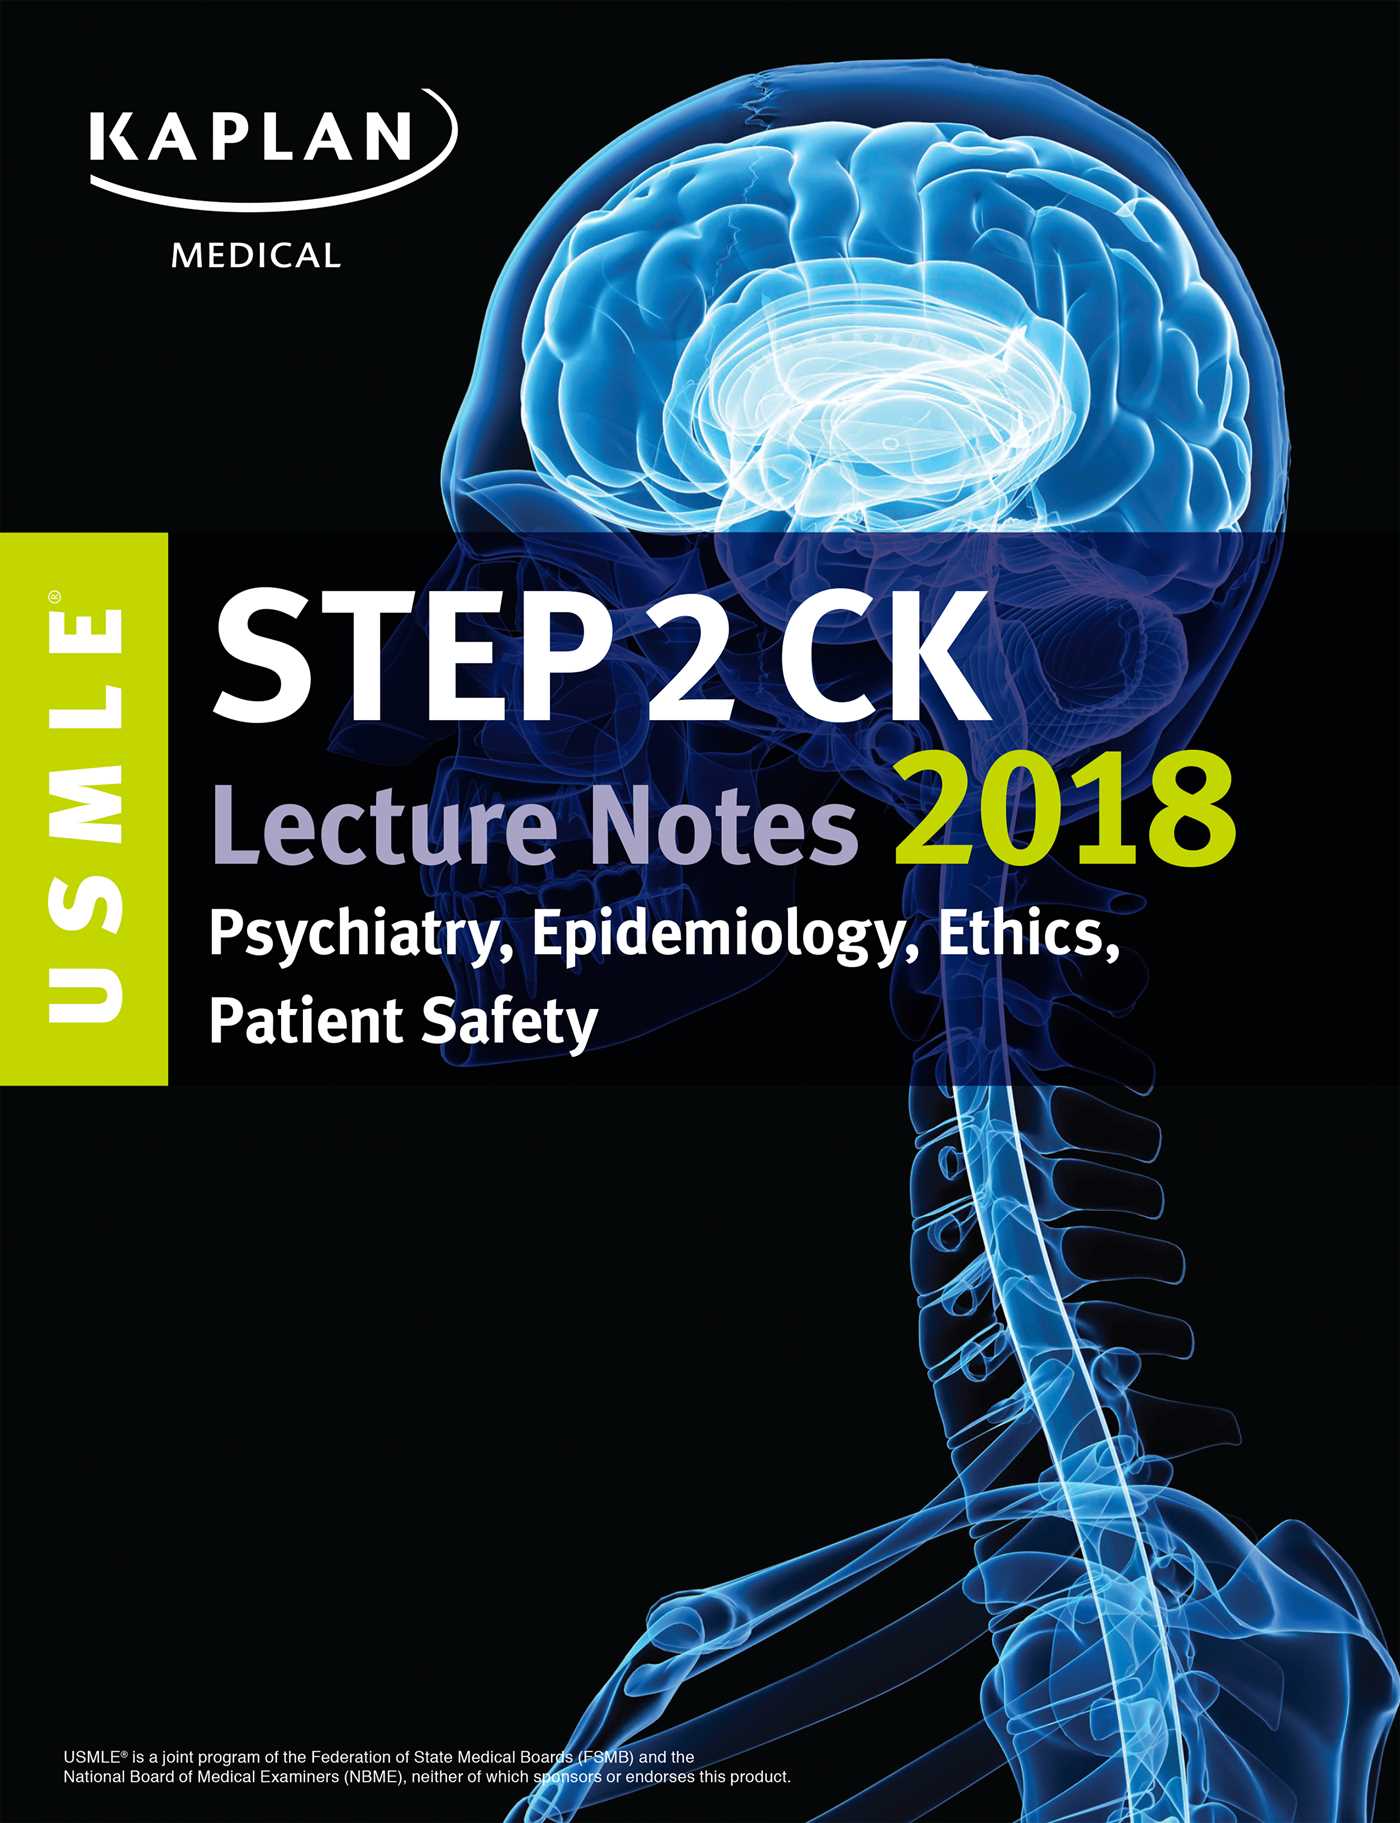 USMLE Step 2 CK Kaplan Lecture Notes Psychiatry, Epidemiology, Ethics, Patient Safety 2018 PDF